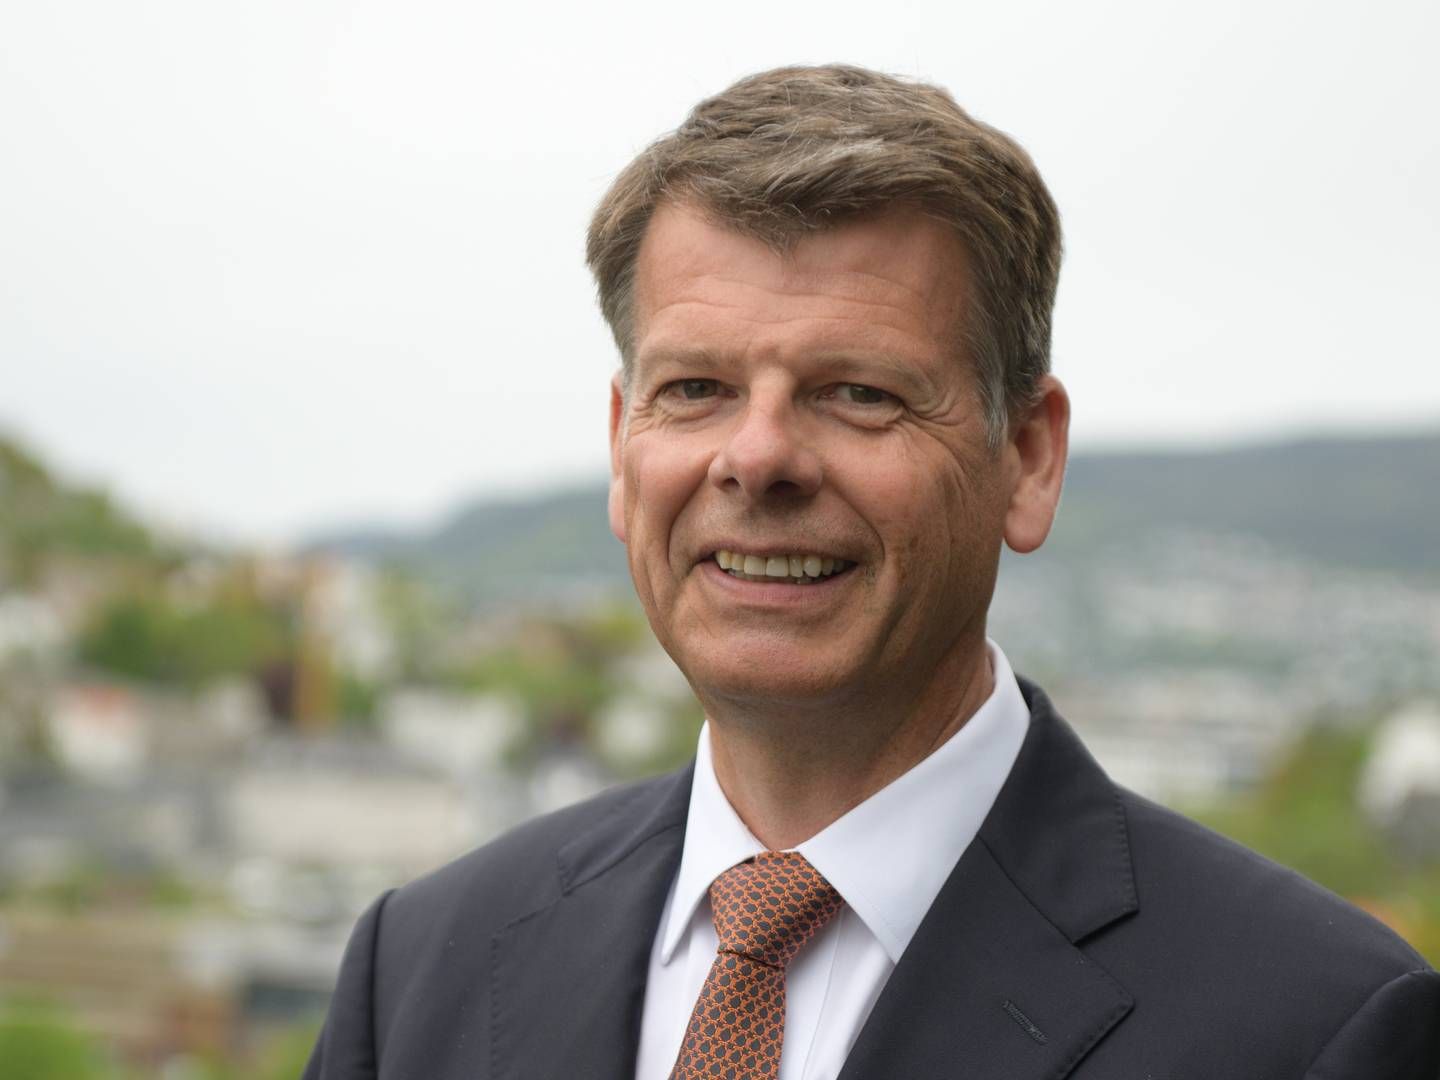 ”We expect continued strong spot rates across most trade lanes, and foresee slightly improved TCE results in 4Q22," says Odfjell CEO Harald Fotland. | Photo: Gunnar Eide / Odfjell